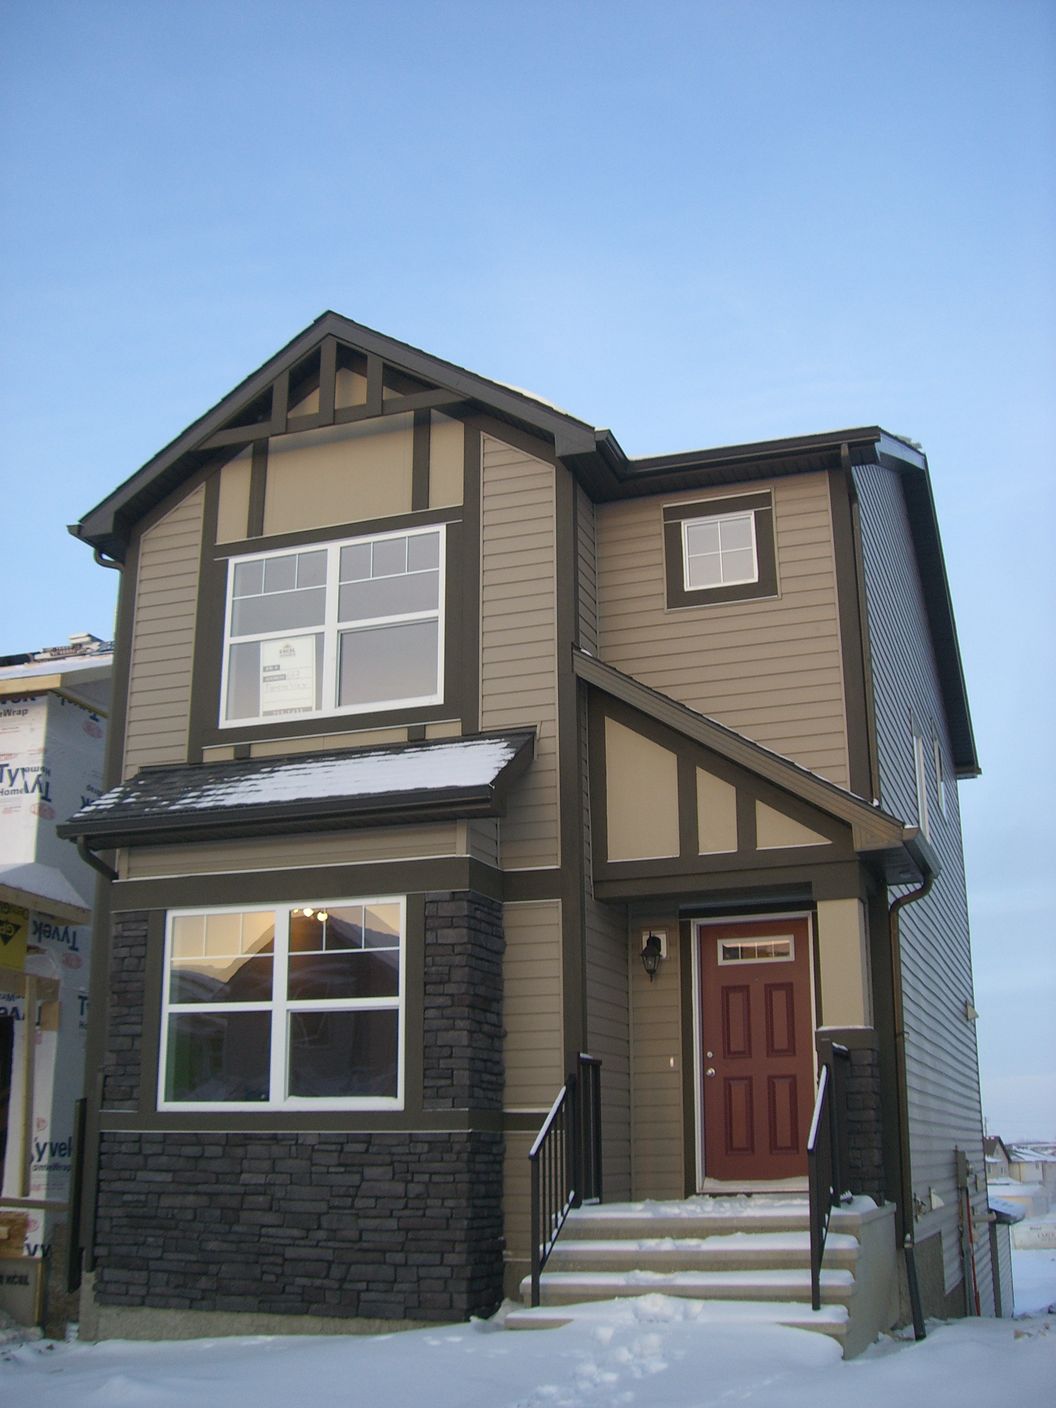 3 bdrm, 2.5 bath w/ dbl detached garage single family home in Panorama!